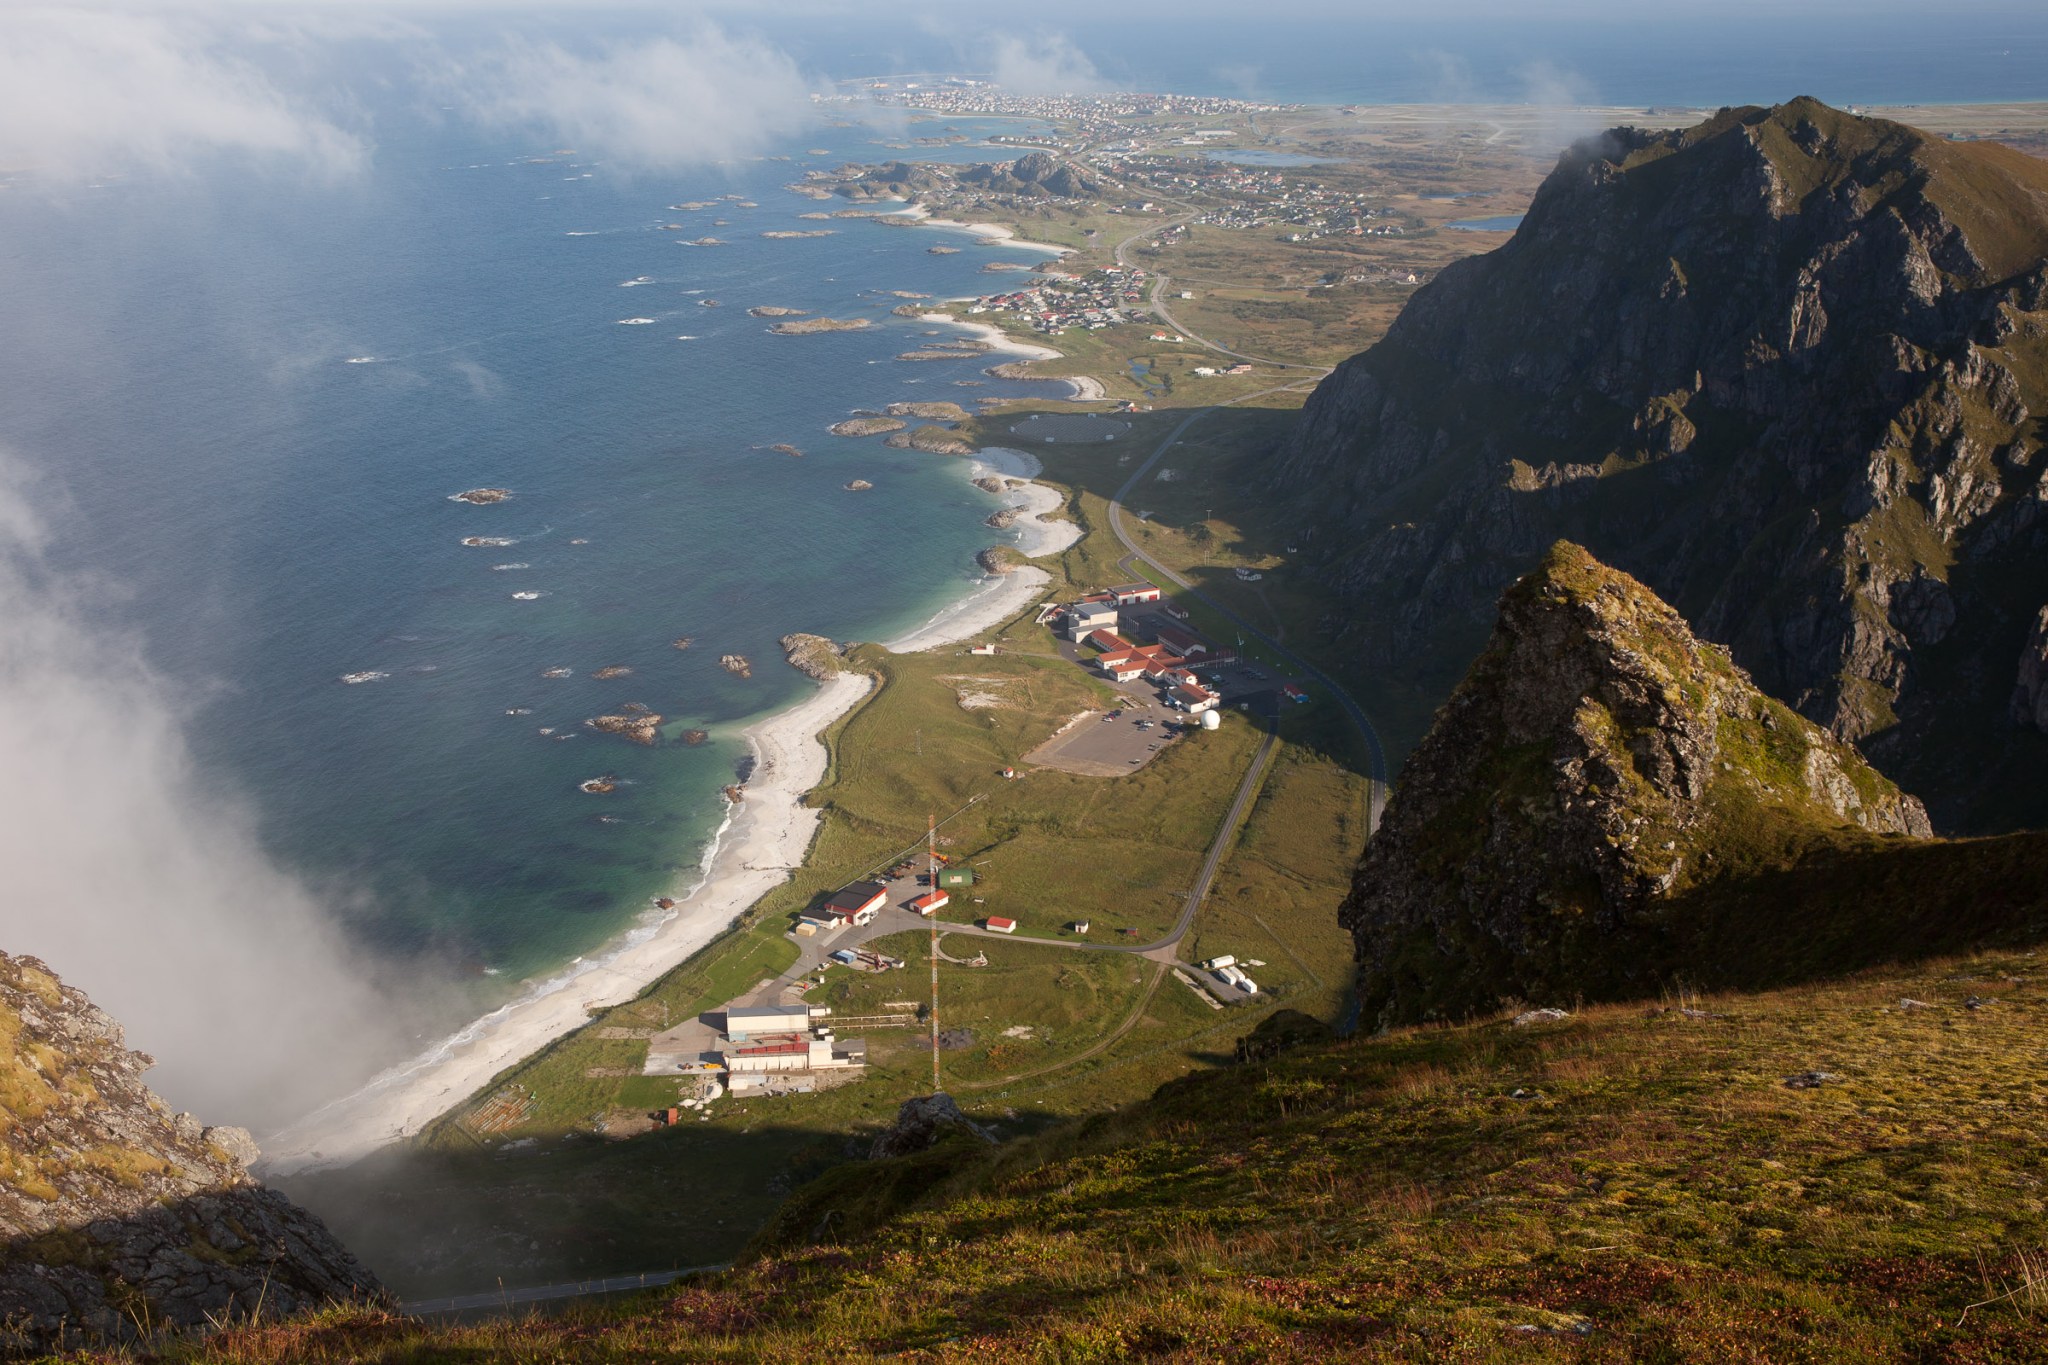 A landscape photo of a coastline in Norway, taken from the top of a mountain. Along the right side of the image is a jagged mountain leading down to a small cluster of buildings.